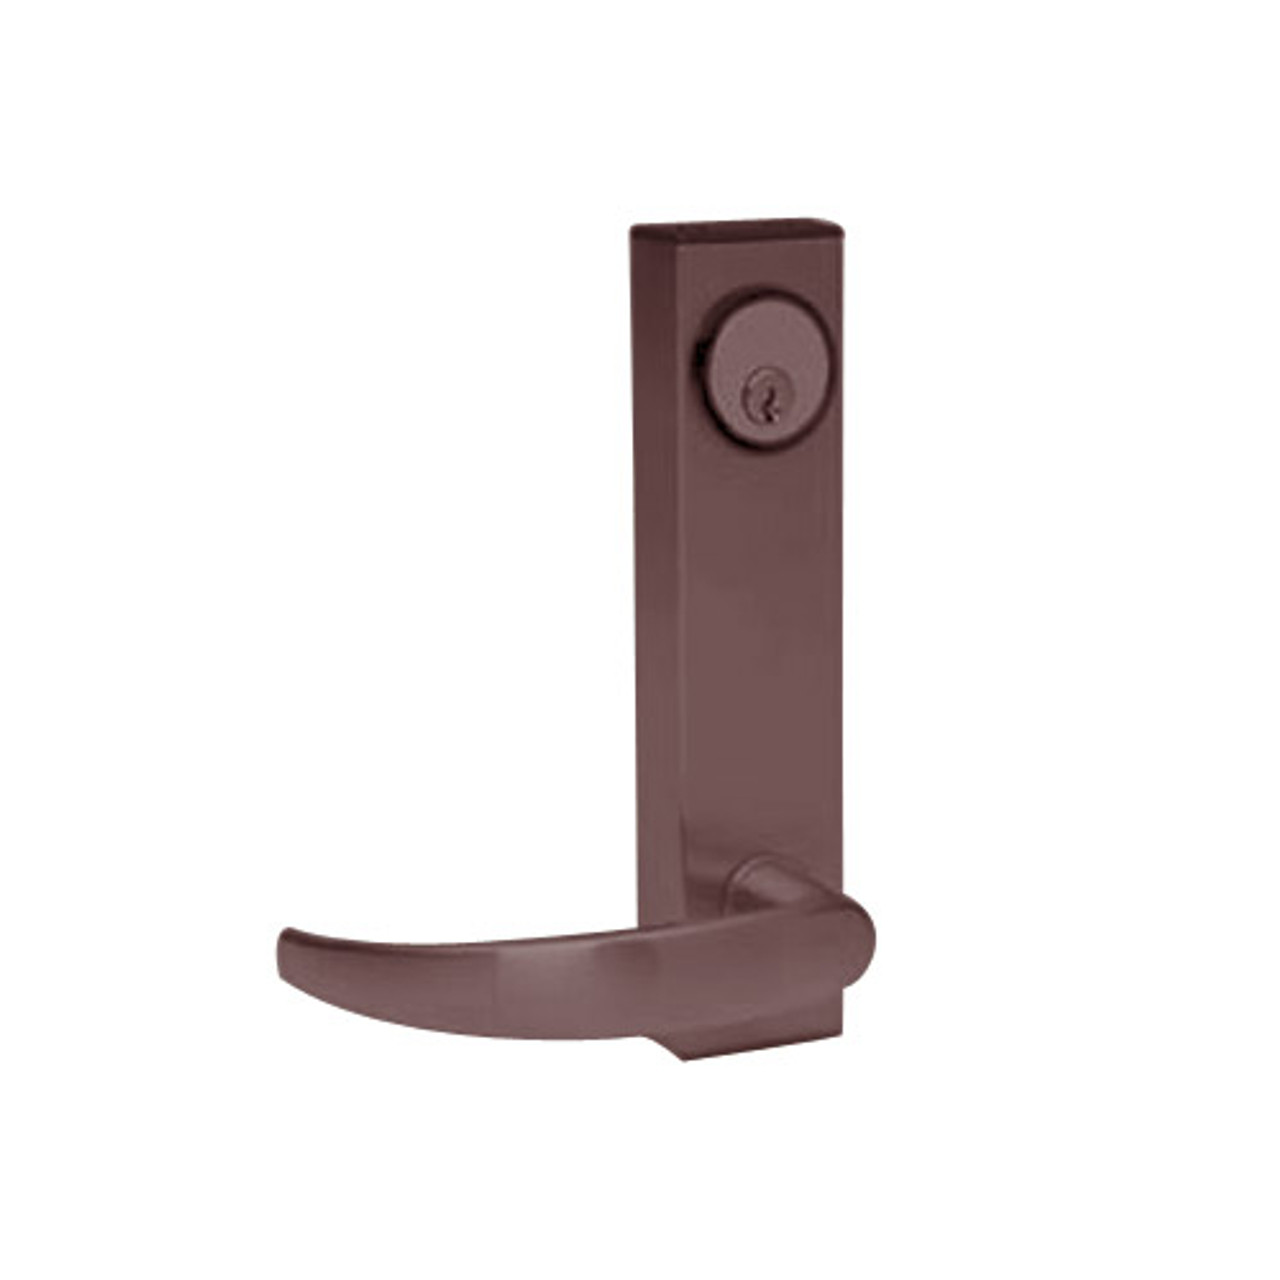 3080E-01-0-97-35 US10B Adams Rite Electrified Entry Trim with Curve Lever in Oil Rubbed Bronze Finish